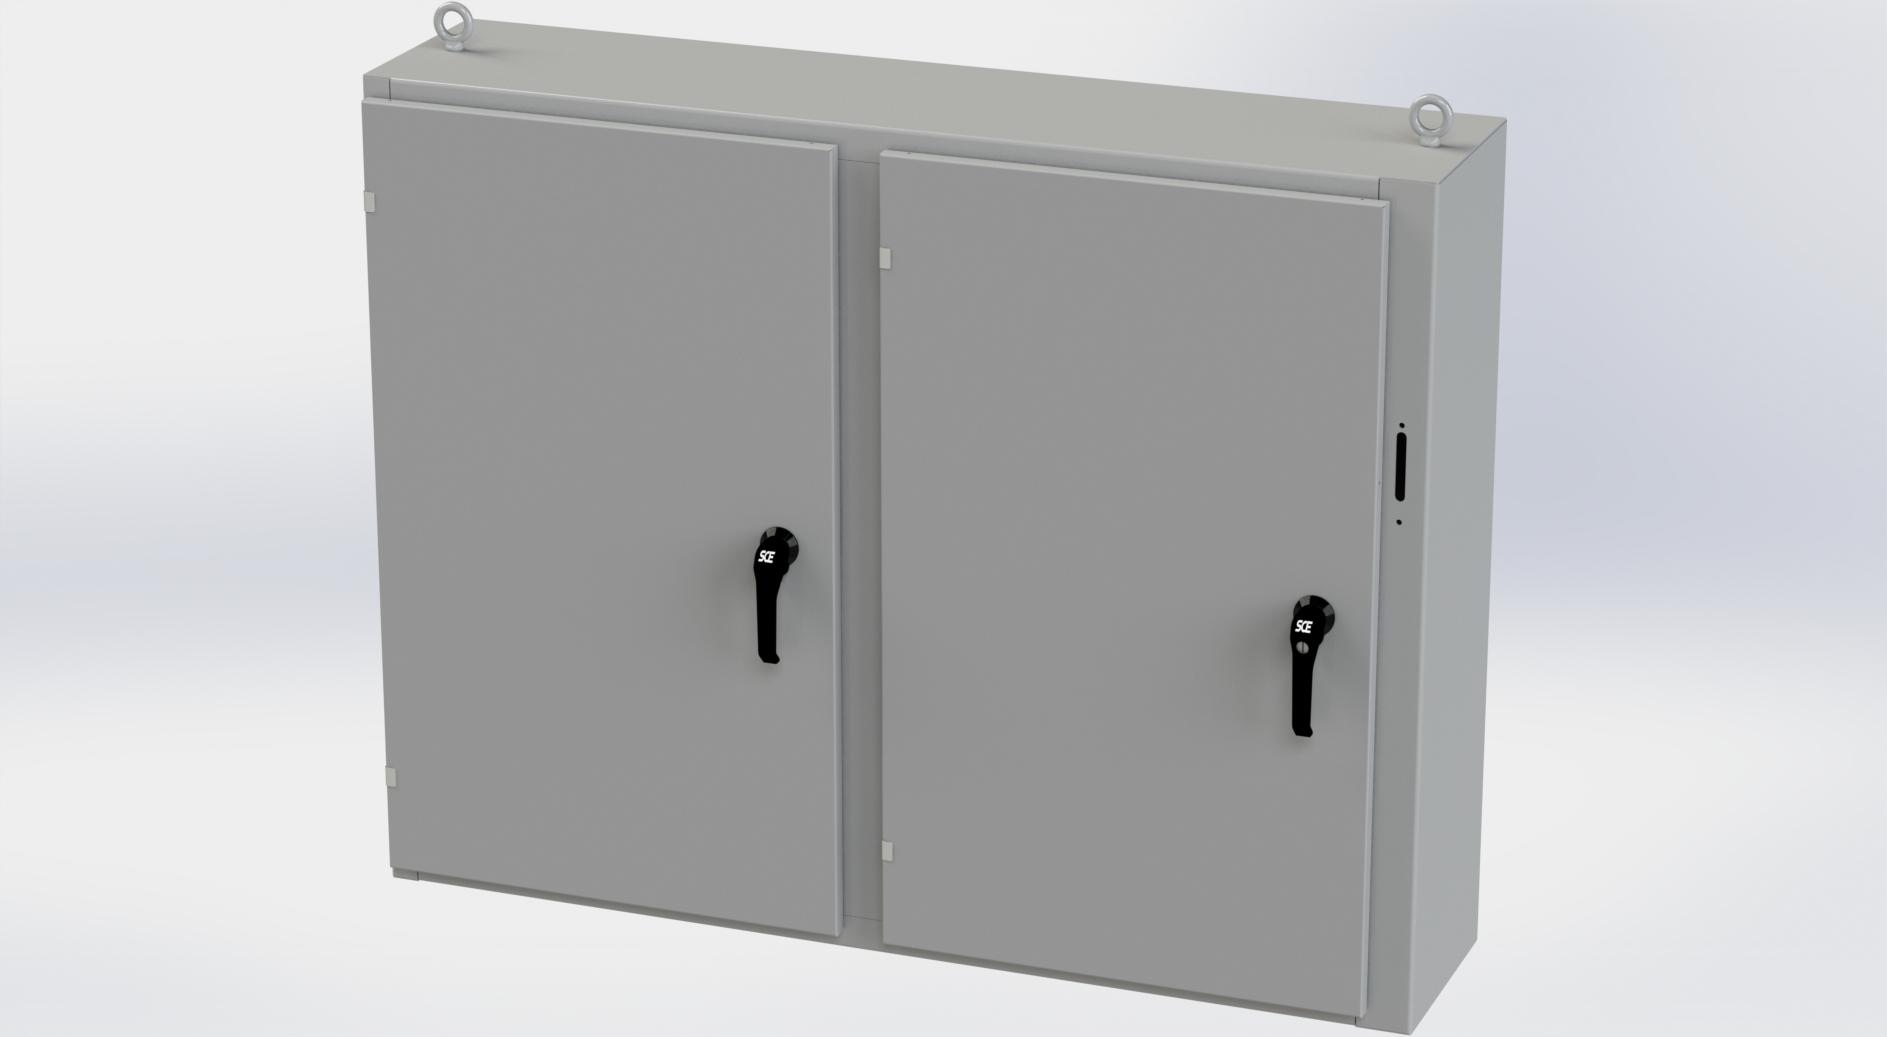 Saginaw Control SCE-42X2D5412 2DR Disc. Enclosure, Height:42.00", Width:53.75", Depth:12.00", ANSI-61 gray powder coating inside and out. Optional sub-panels are powder coated white.